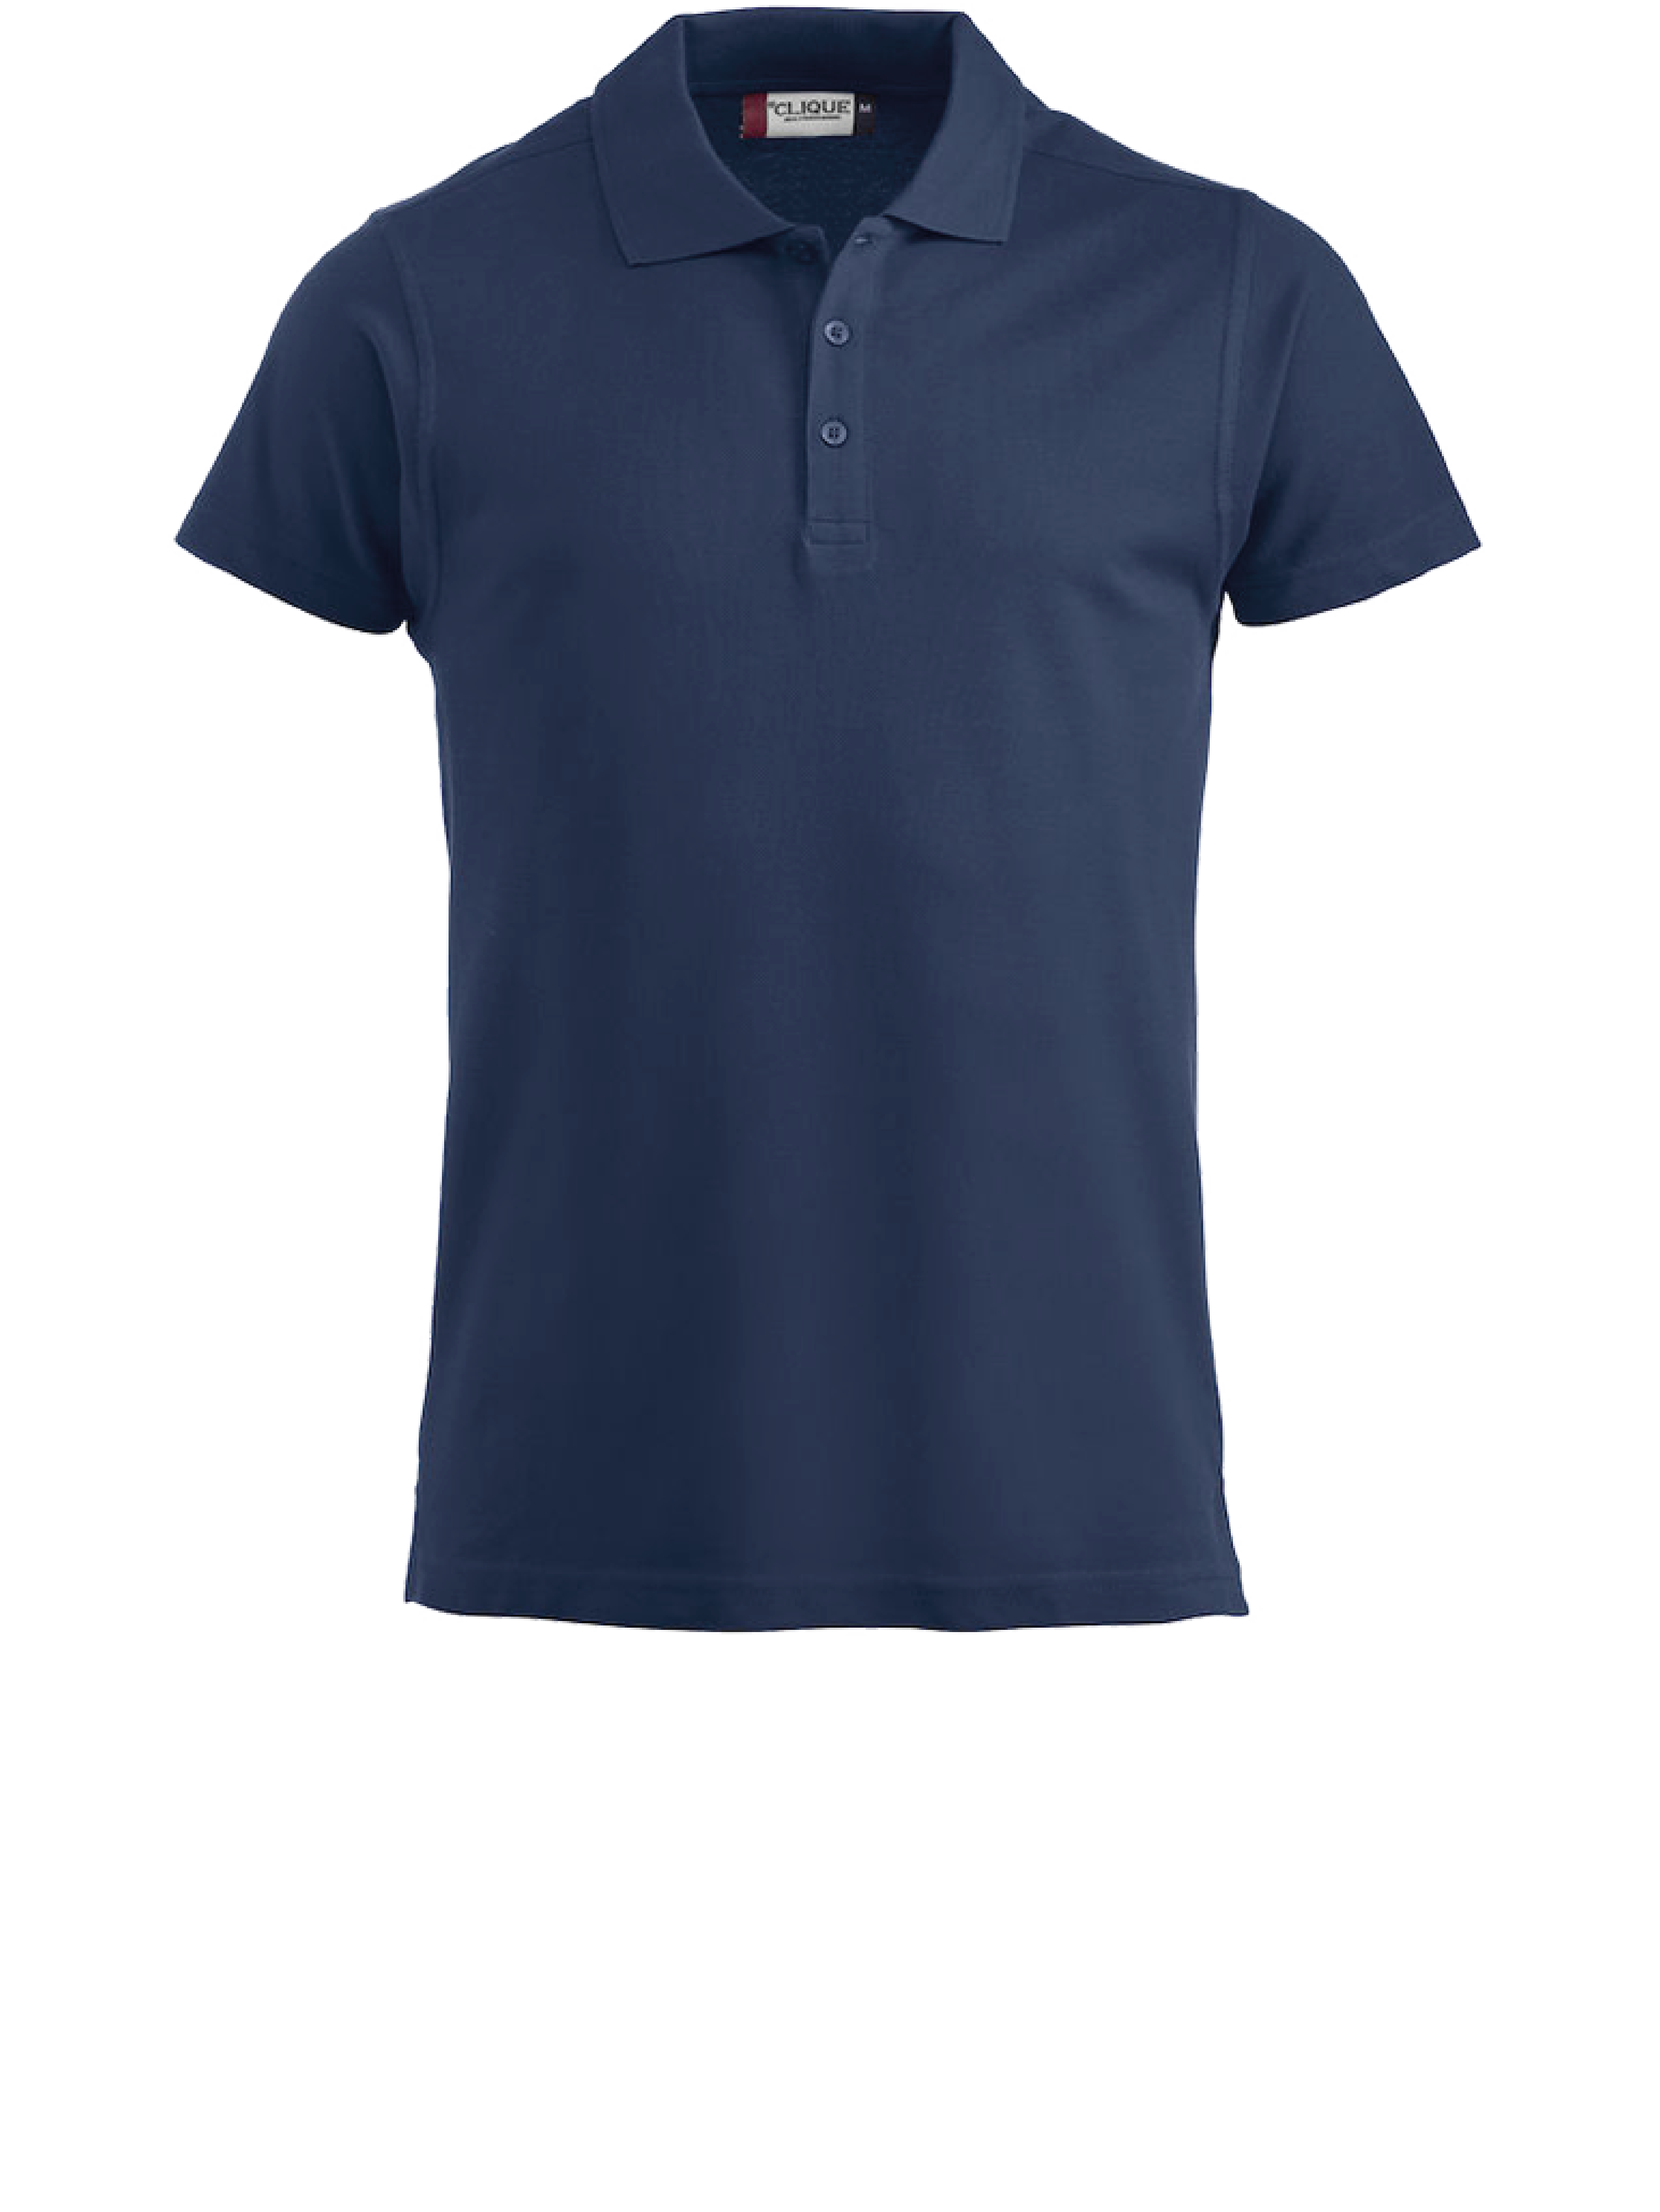 polo dark navy-01.png